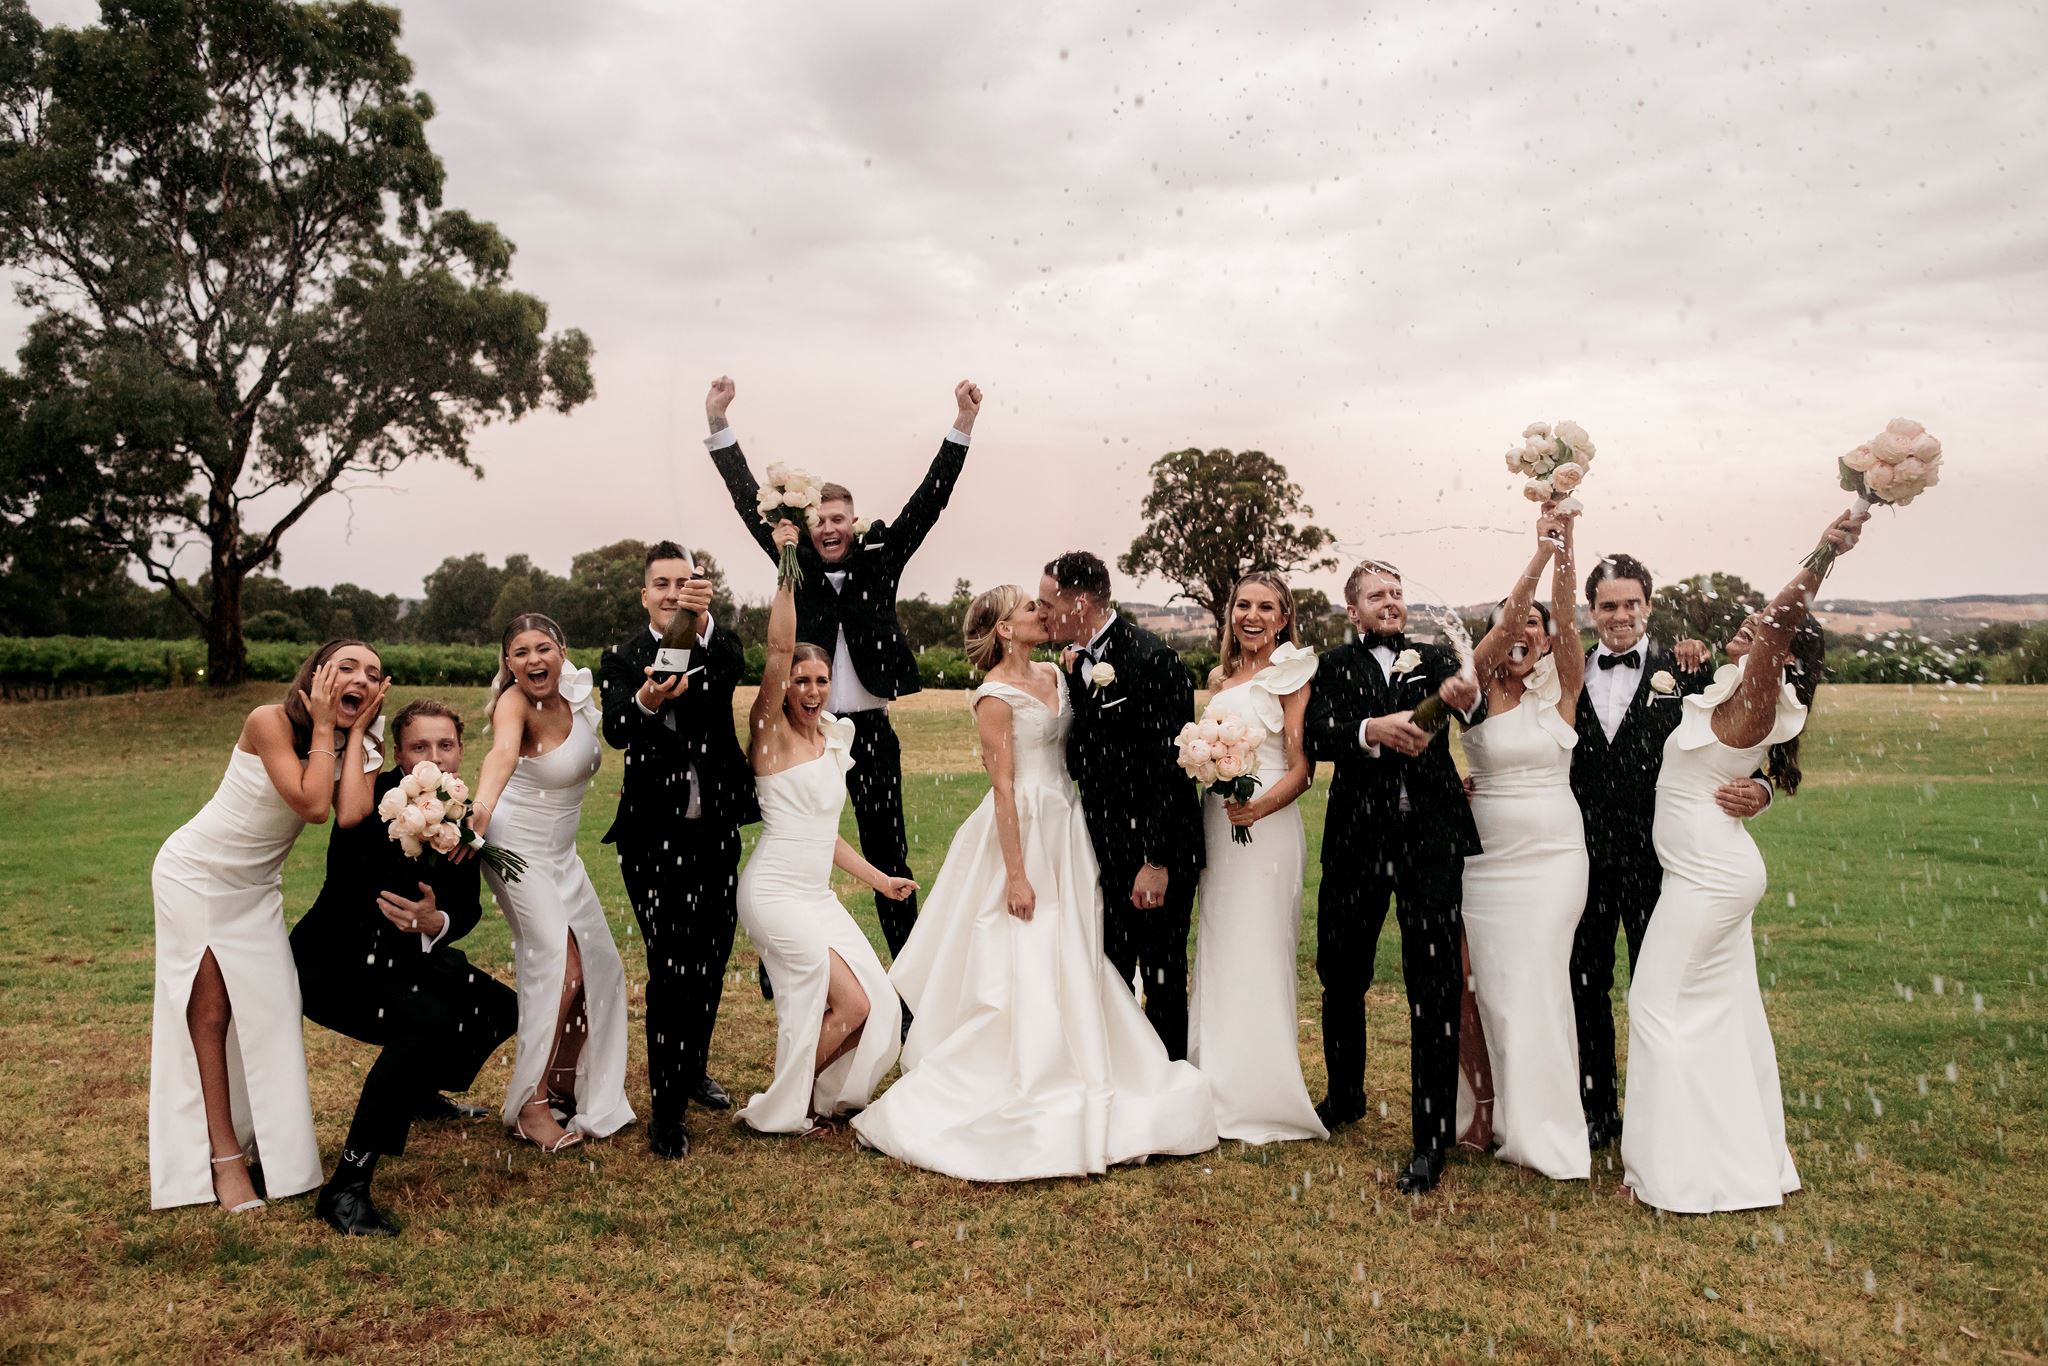 get-the-lowdown-on-who-s-who-in-your-wedding-party